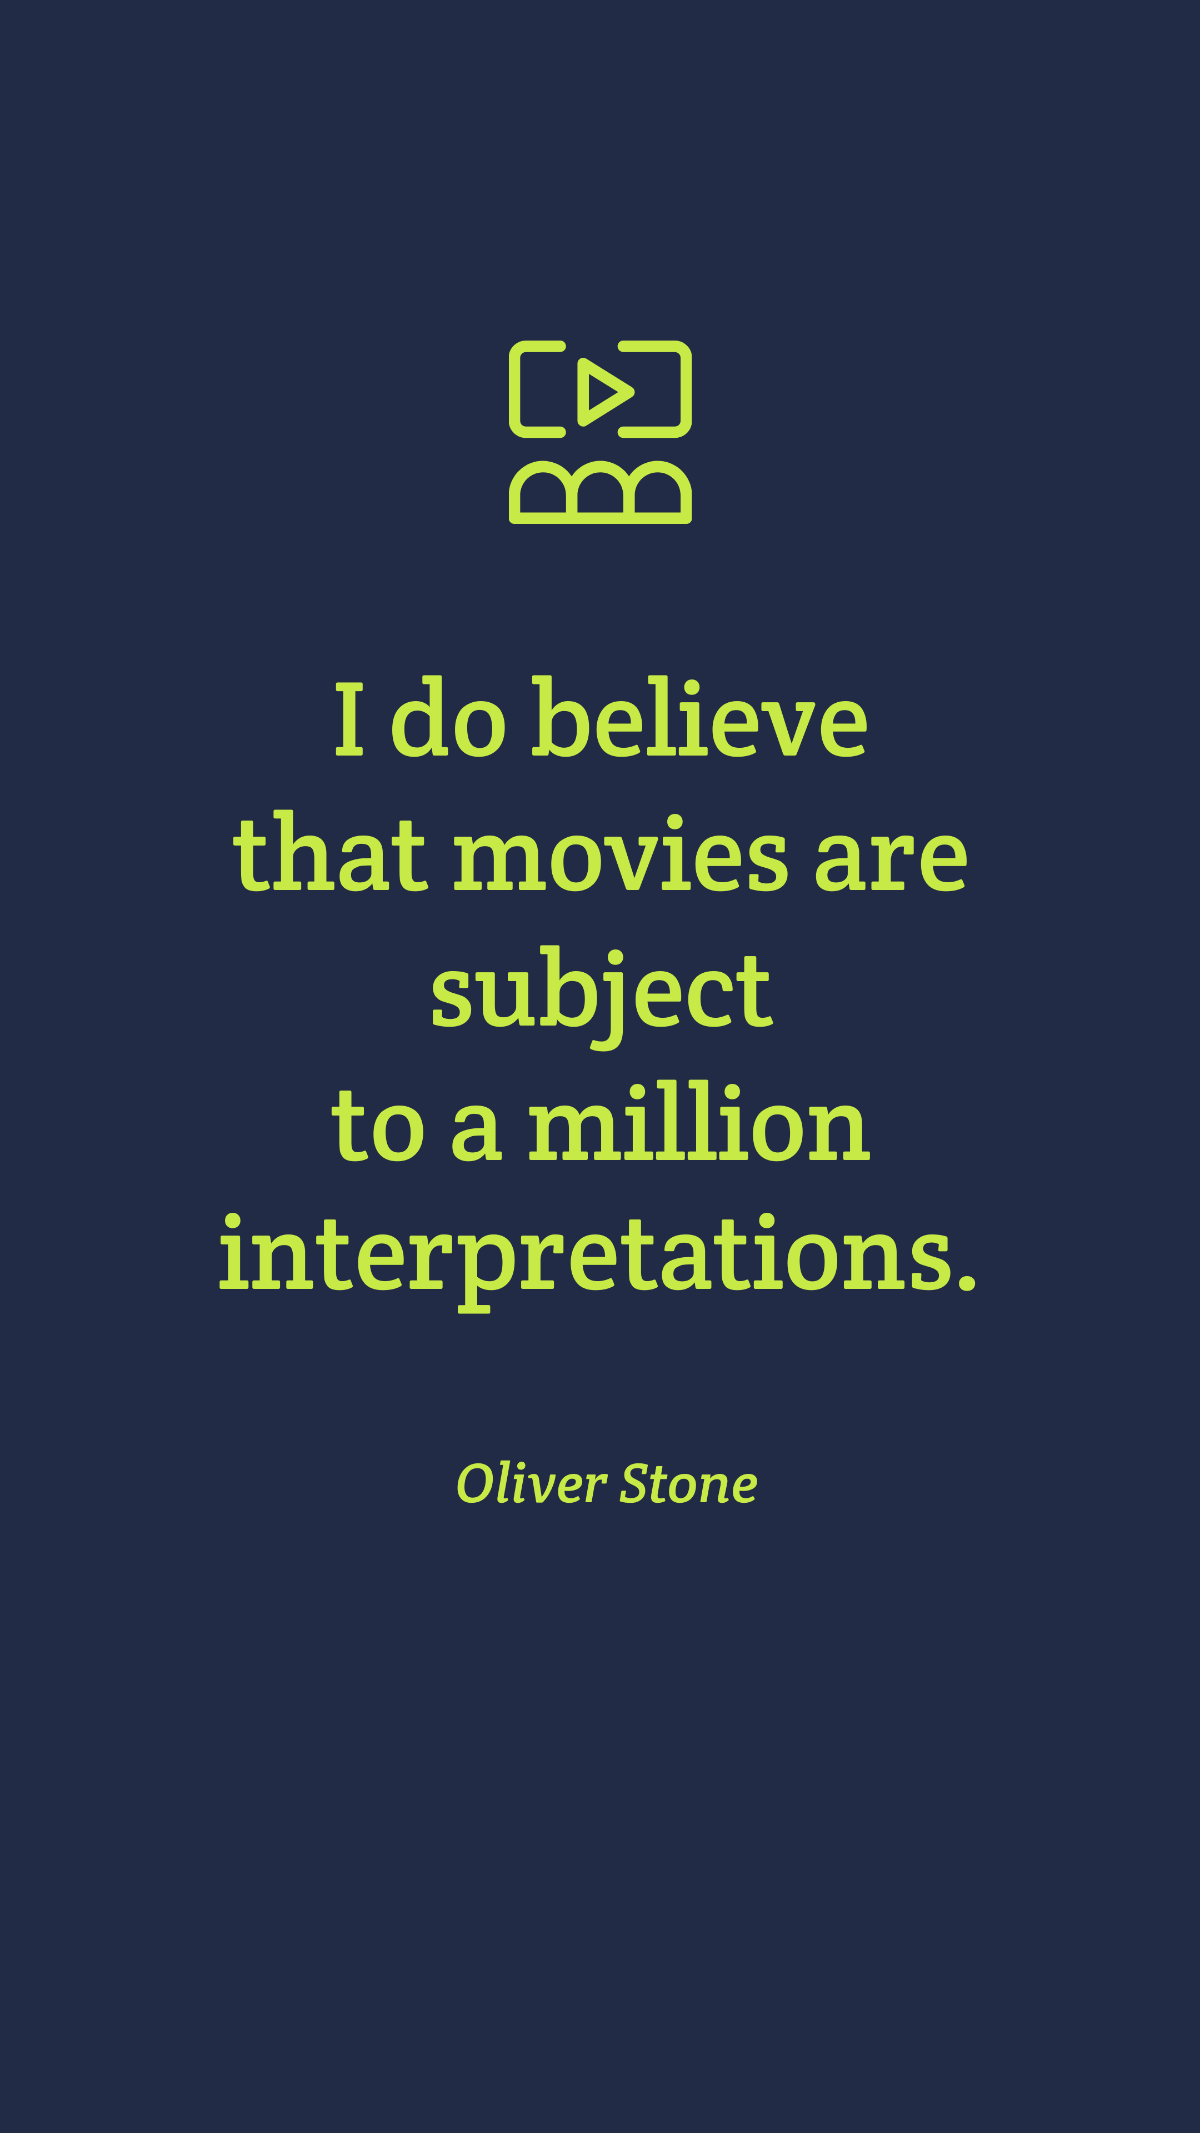 Oliver Stone - I do believe that movies are subject to a million interpretations. Template